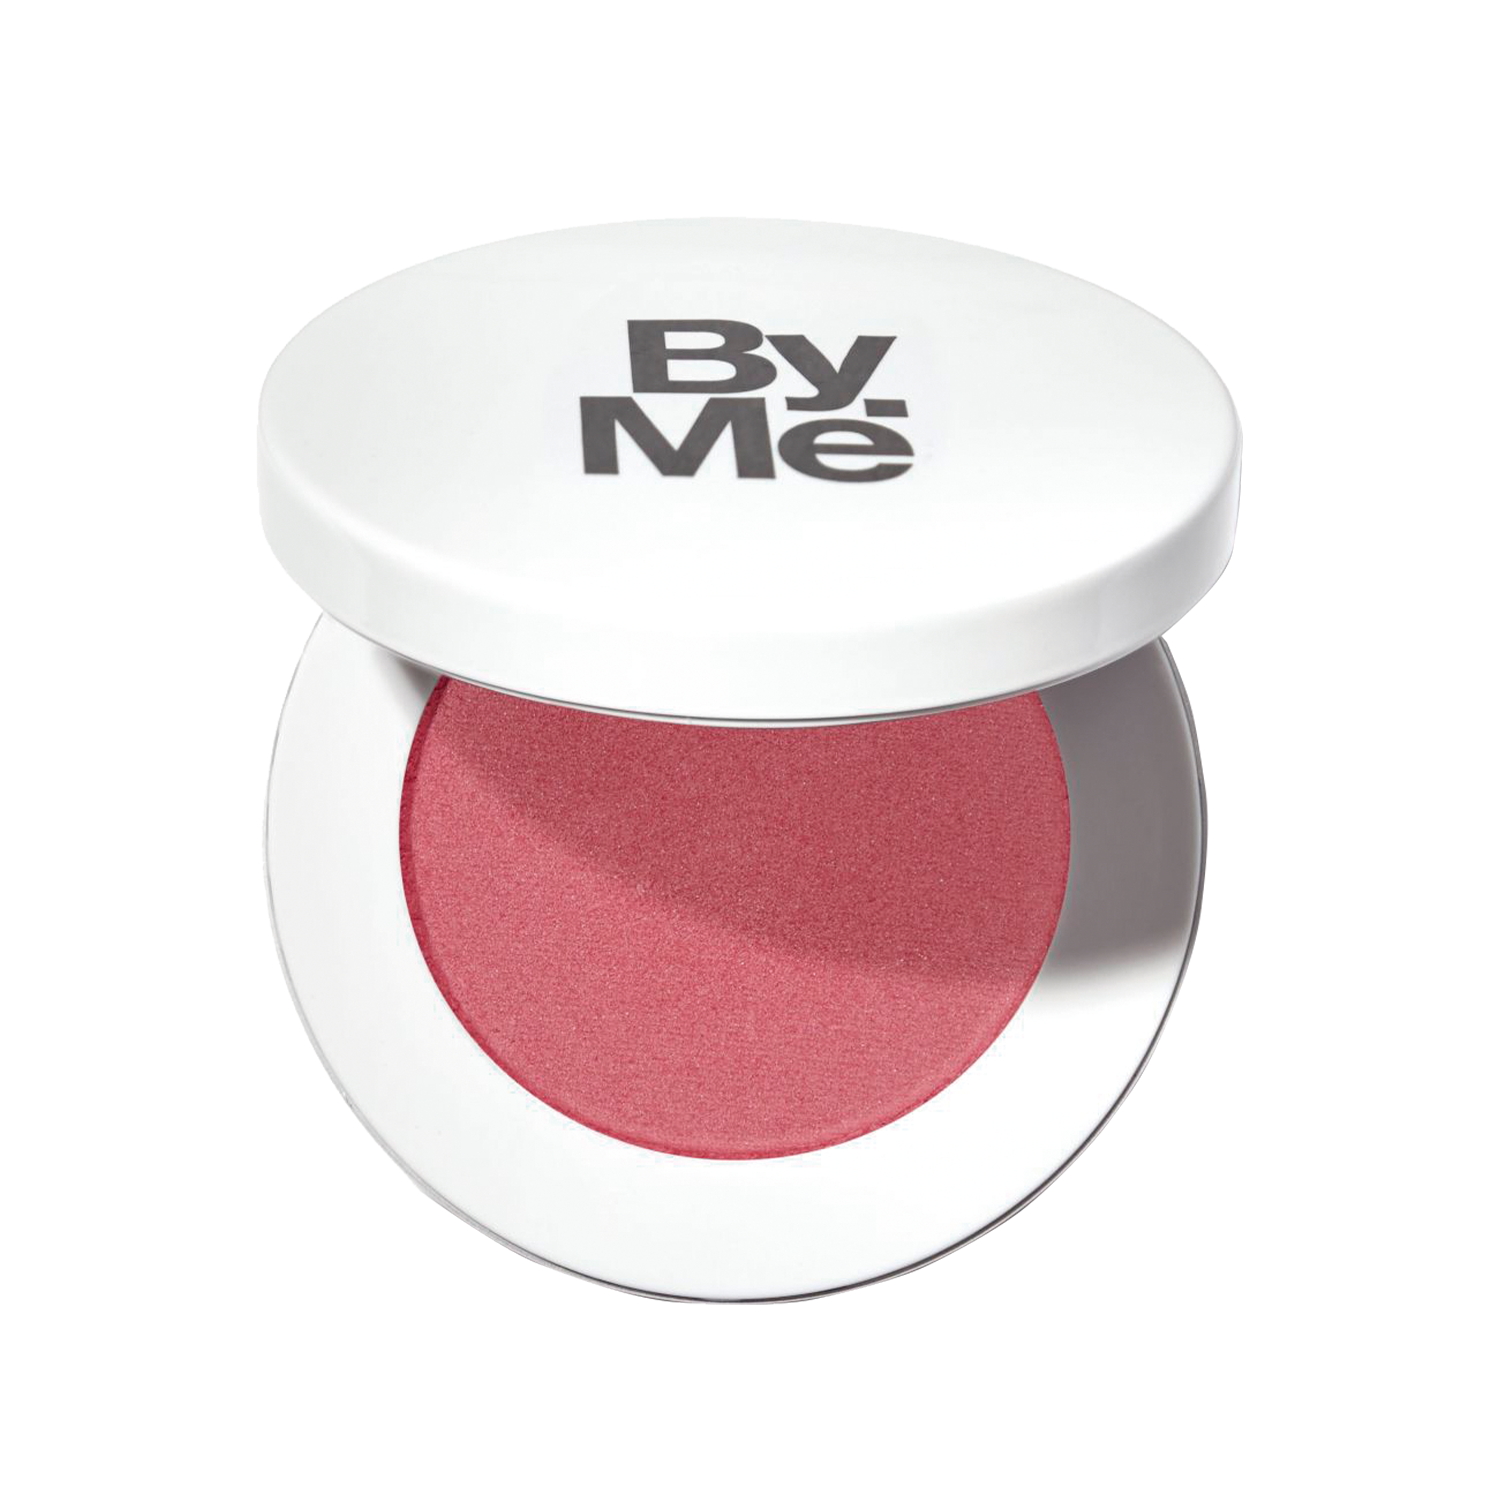 MyBeautyBrand Pure Power Blush in Florence Dusty Red 506 MyBeautyBrand Pure Power Blush in Florence Dusty Red 506 1